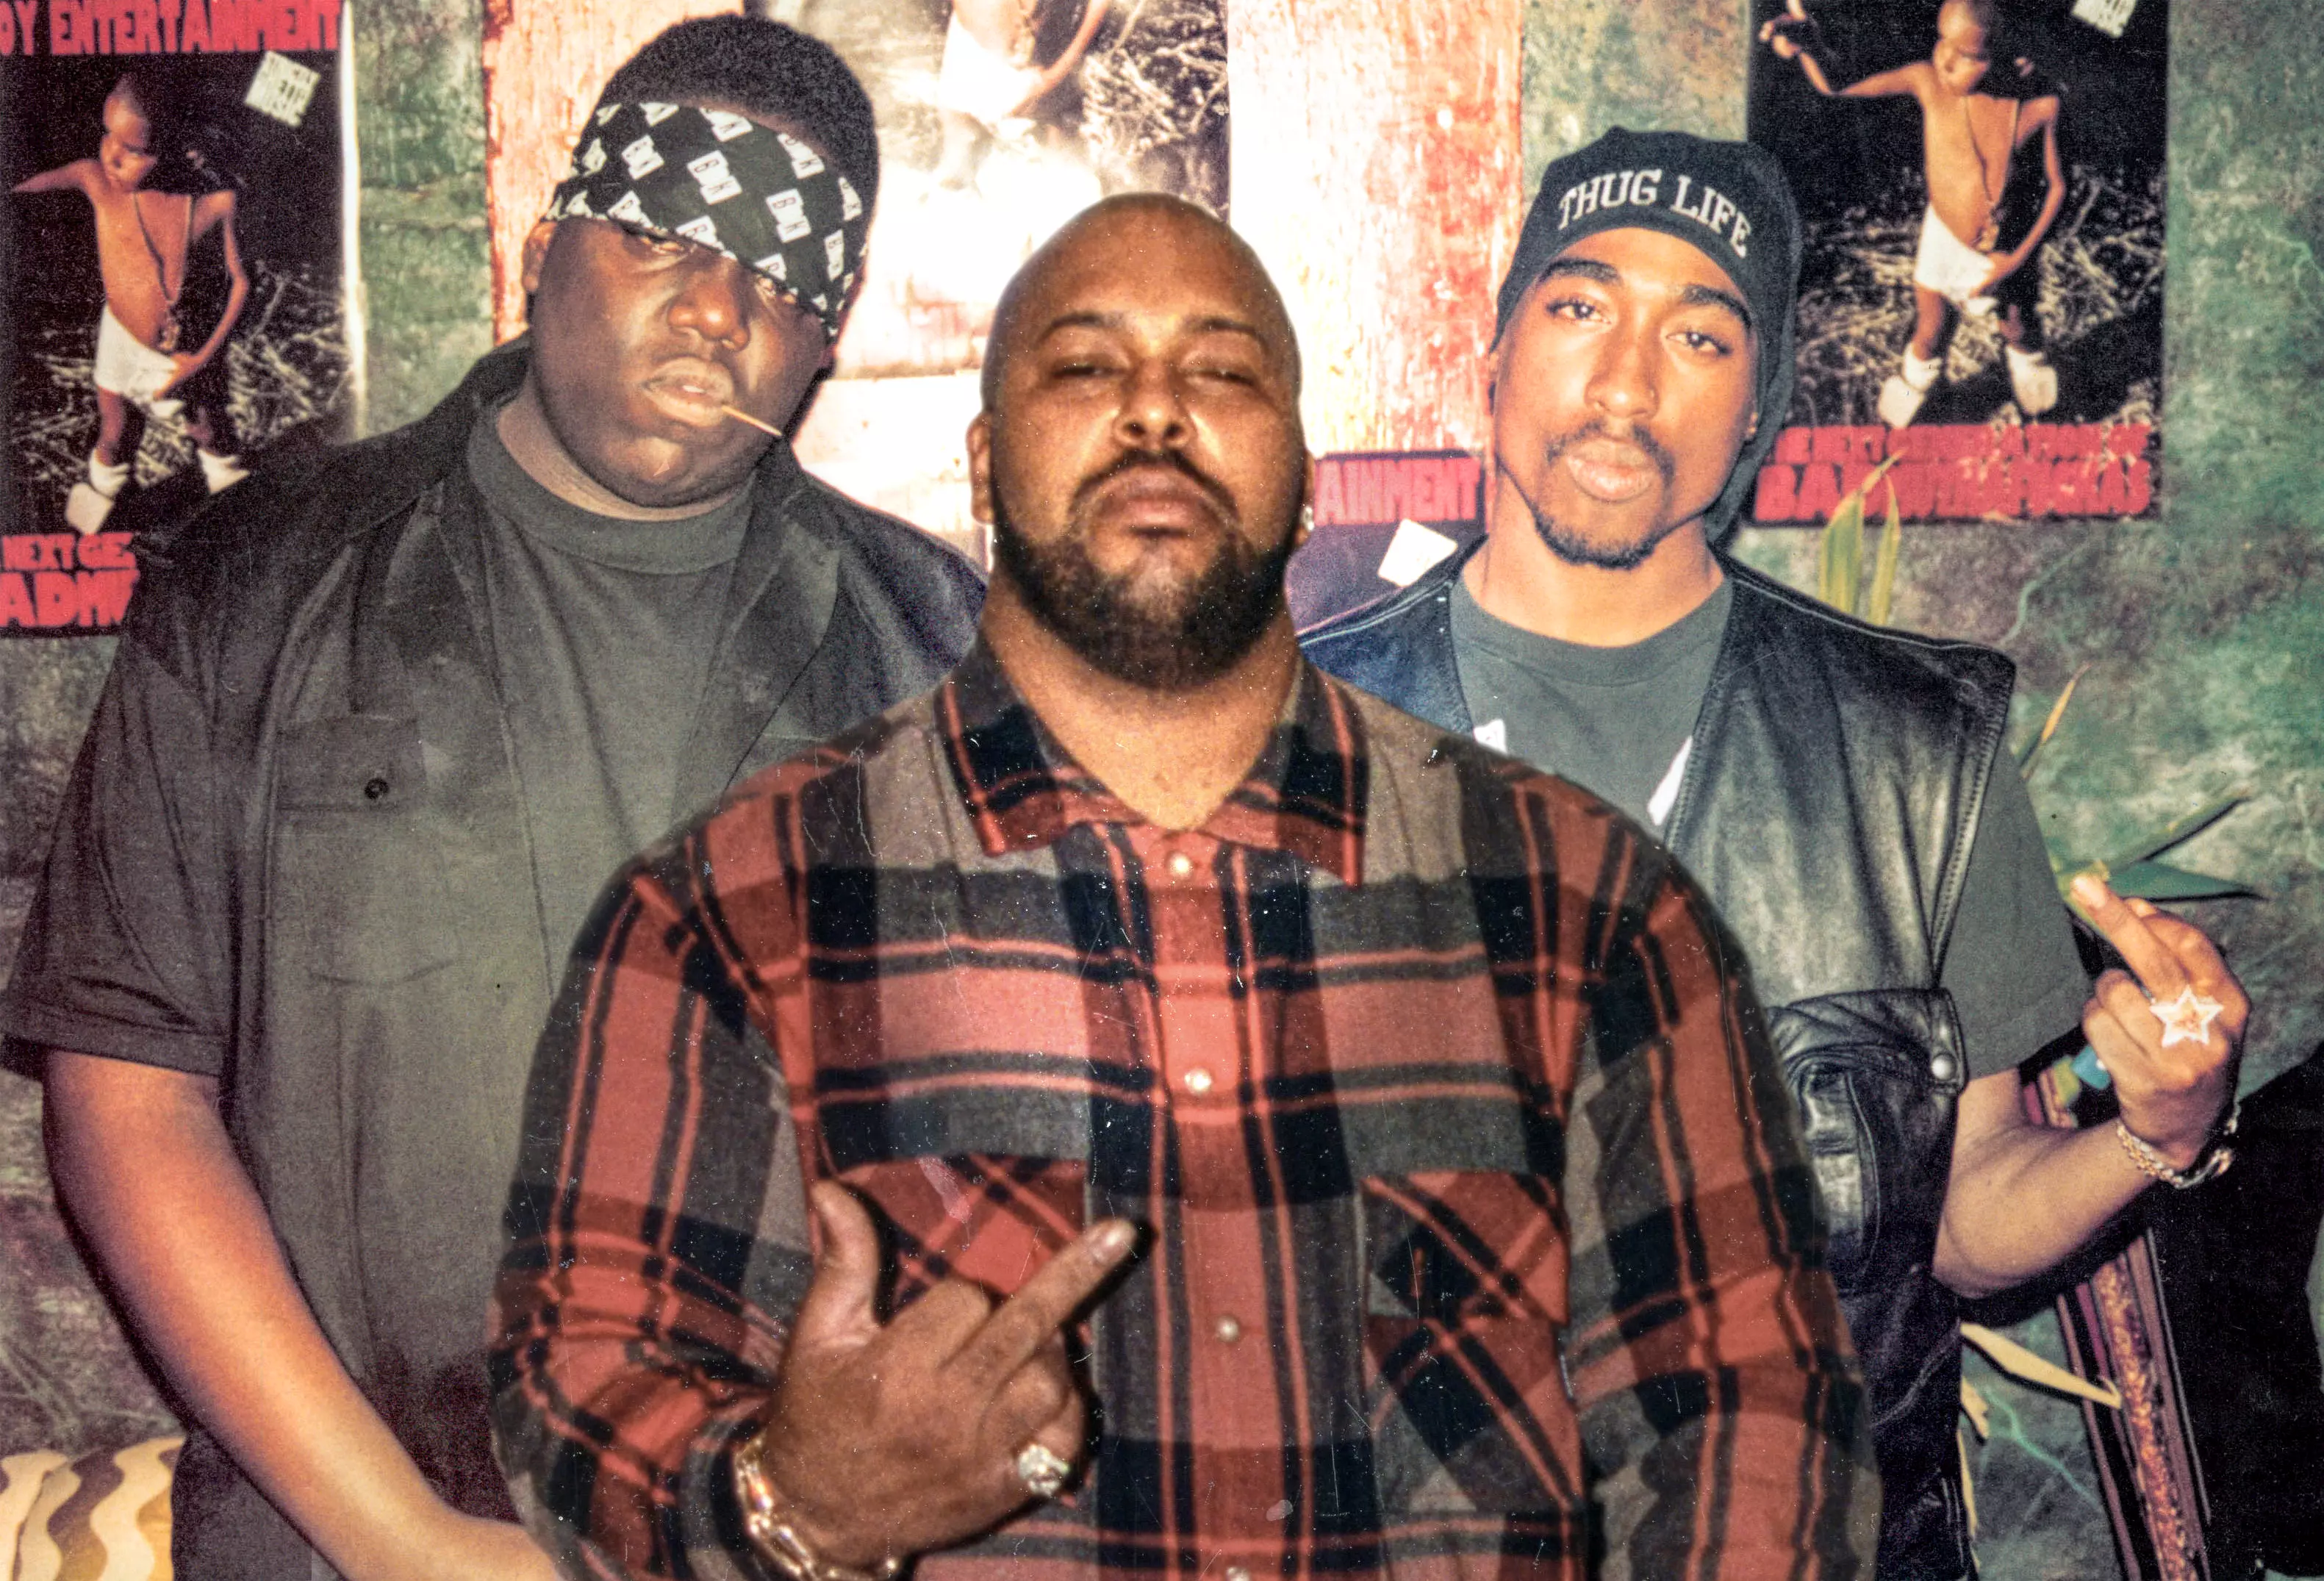 Suge Knight is said to have organised the murders of both Tupac and Biggie.